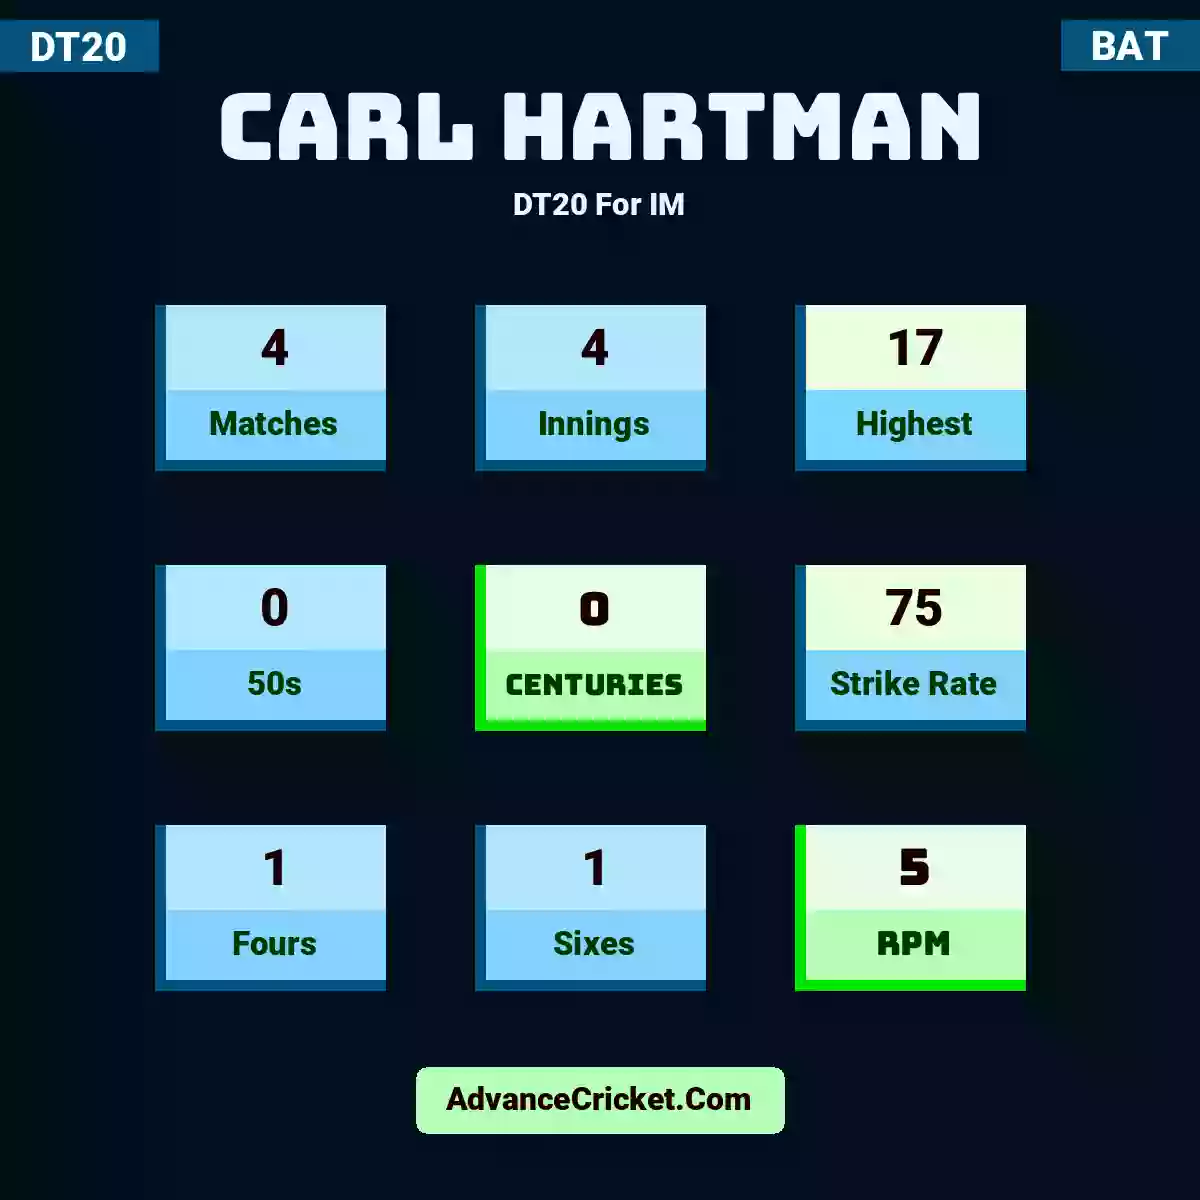 Carl Hartman DT20  For IM, Carl Hartman played 4 matches, scored 17 runs as highest, 0 half-centuries, and 0 centuries, with a strike rate of 75. C.Hartman hit 1 fours and 1 sixes, with an RPM of 5.